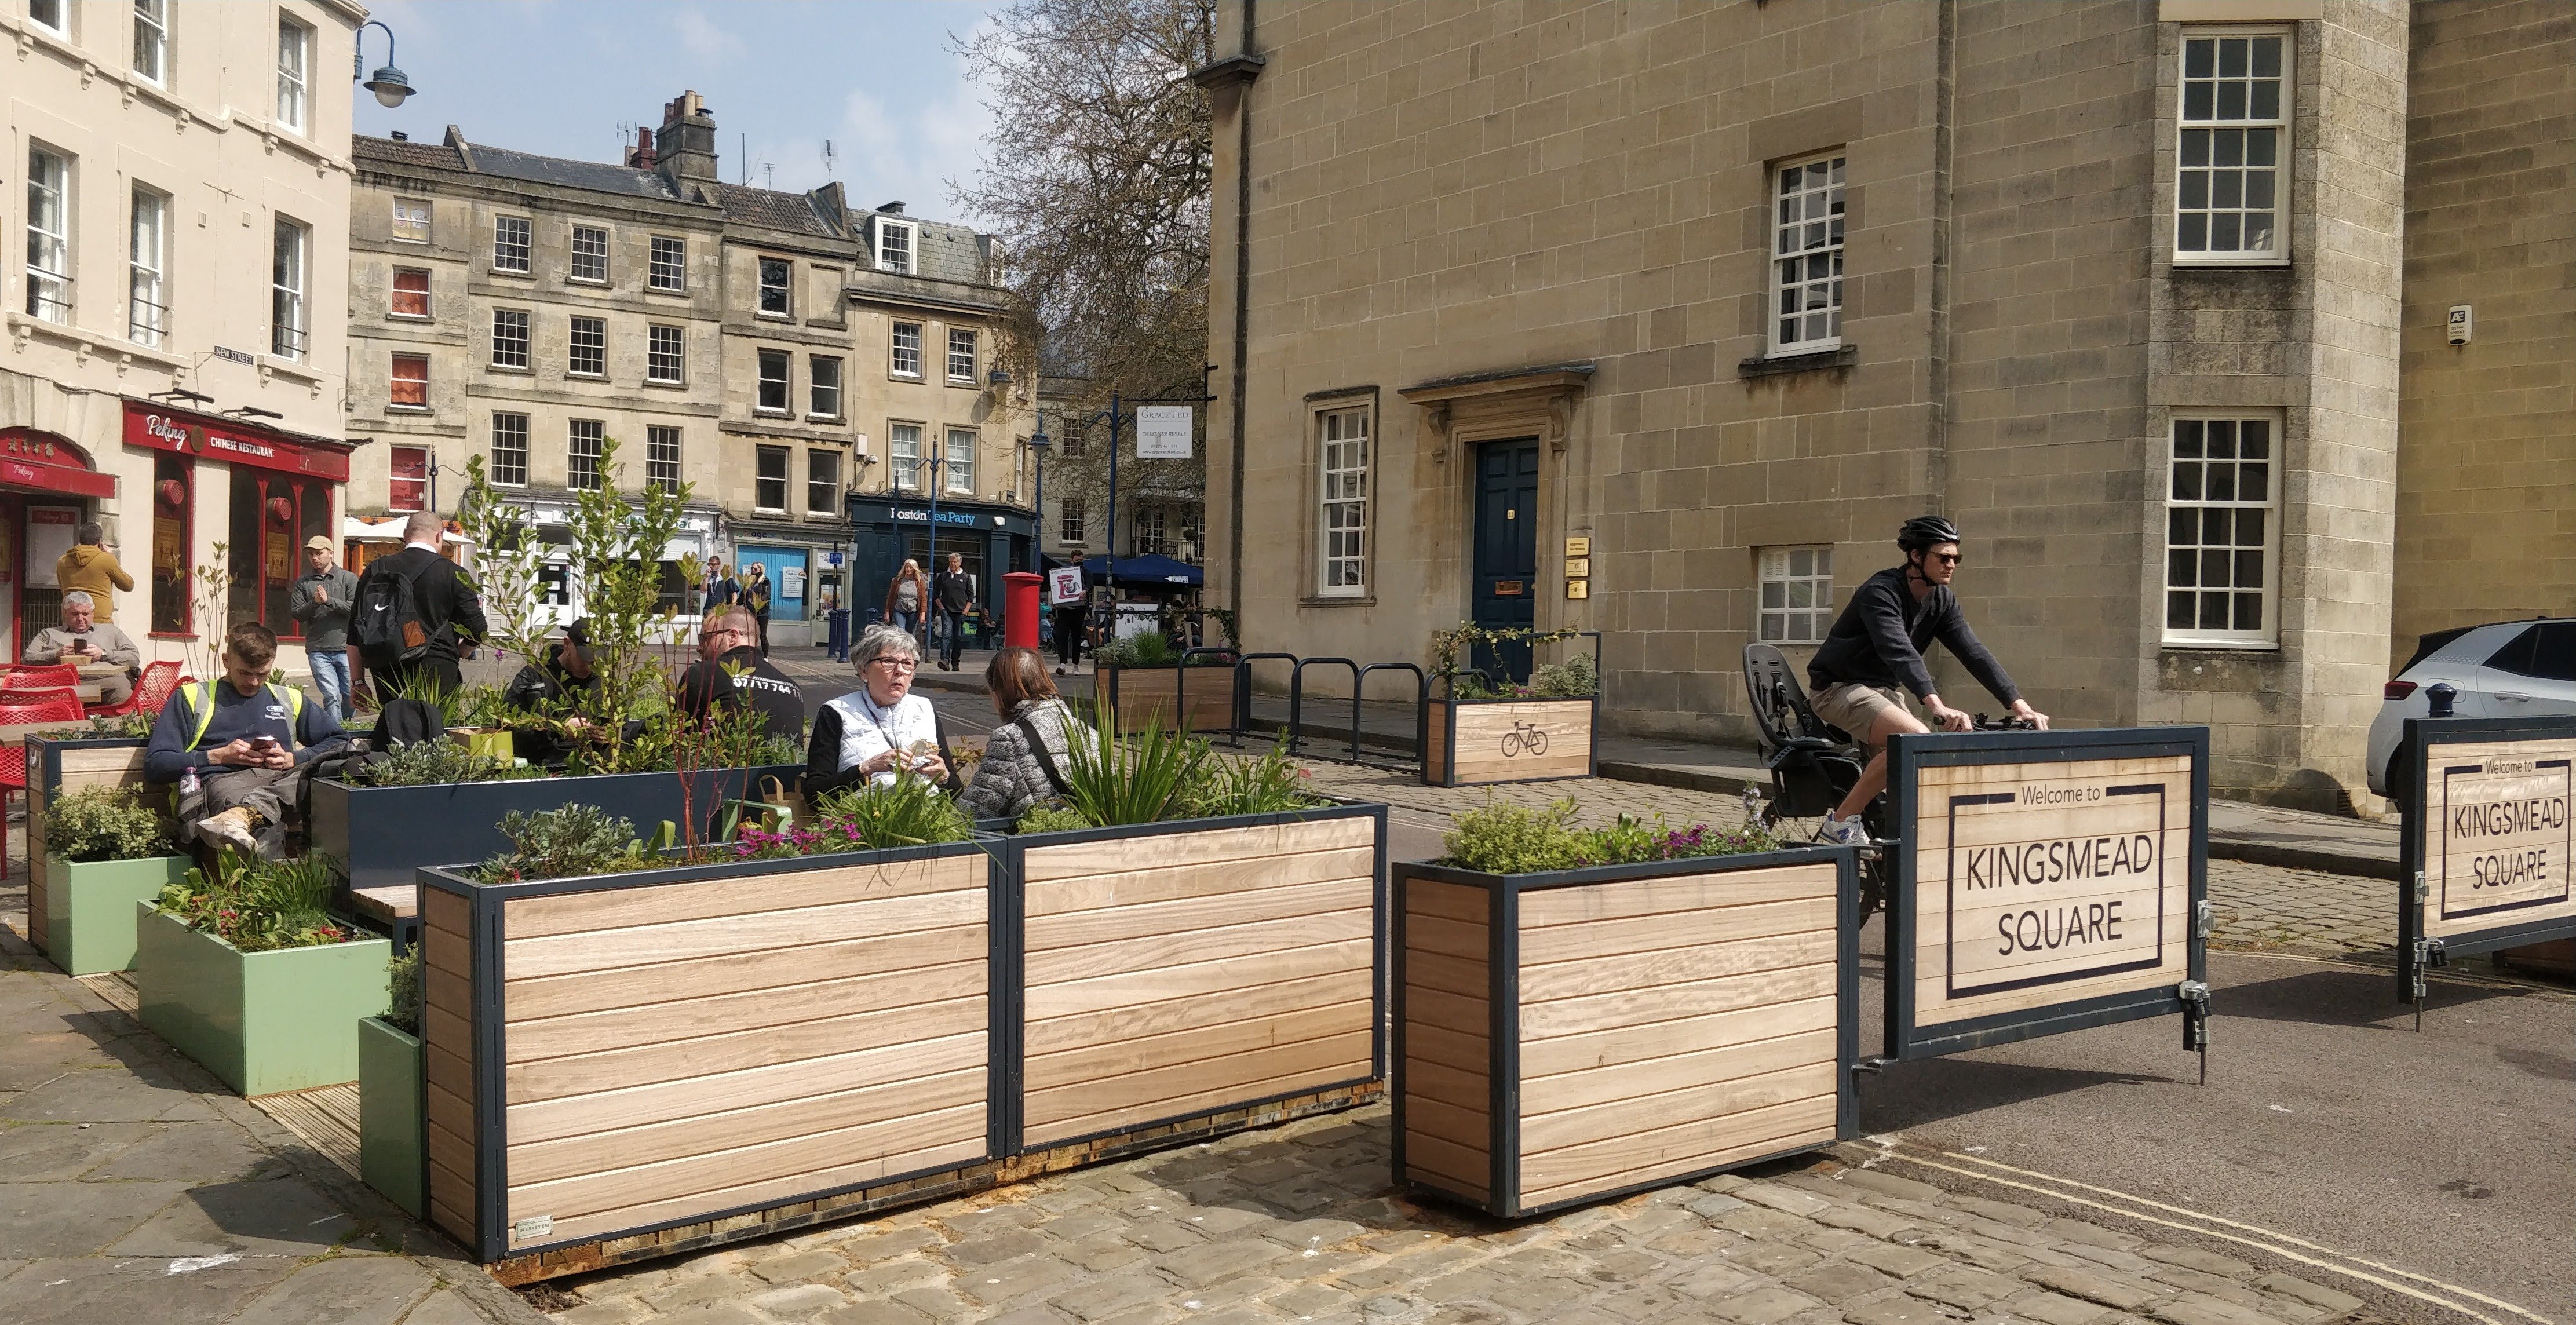 gateway into kingsmead square showing people using the seating and cycling through